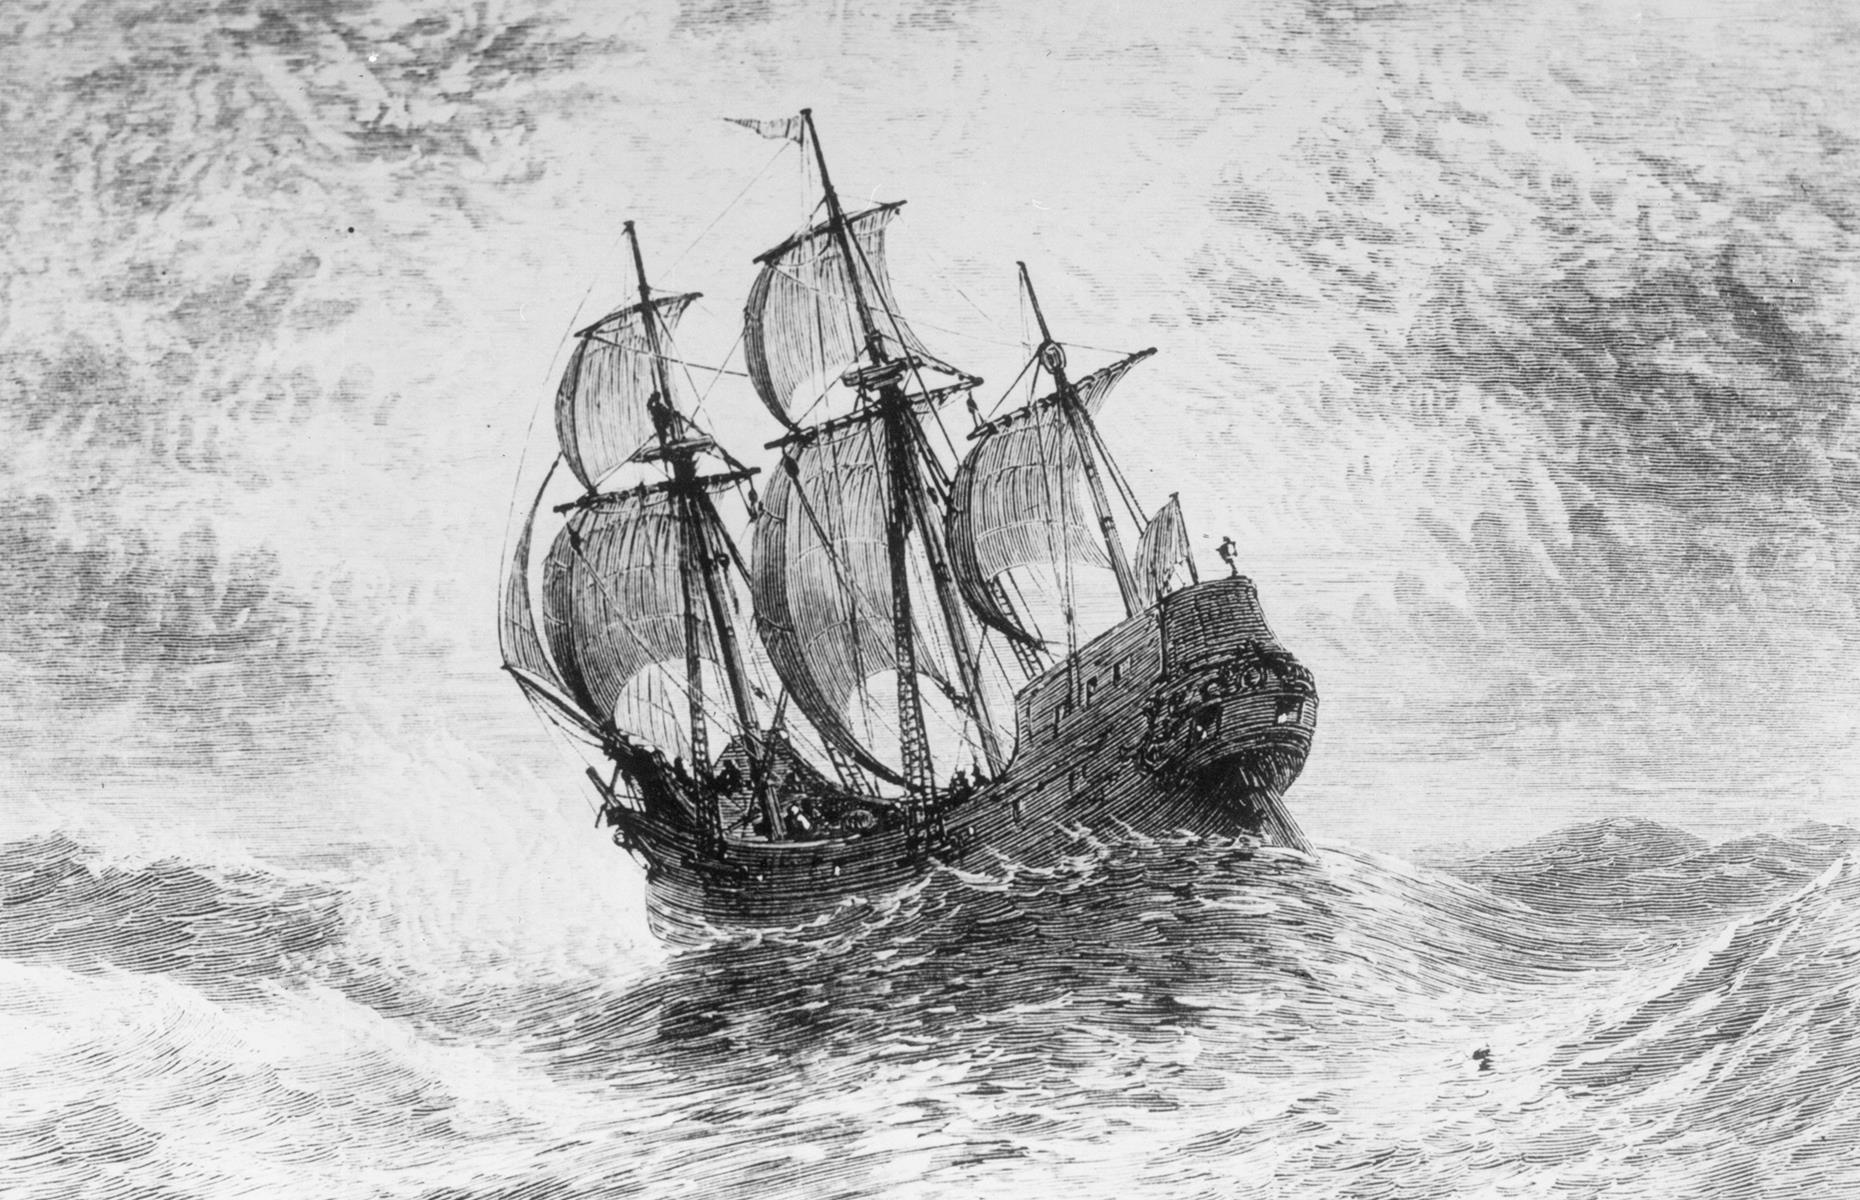 Life on board the Mayflower would have been anything but shipshape. Given the delays that the Pilgrims suffered, the Mayflower struck out during the stormy season, meaning rough waters, biting conditions and plenty of seasickness among both the passengers and the crew. One young passenger was swept right overboard, though he miraculously survived. Another – a sailor – perished during the journey.